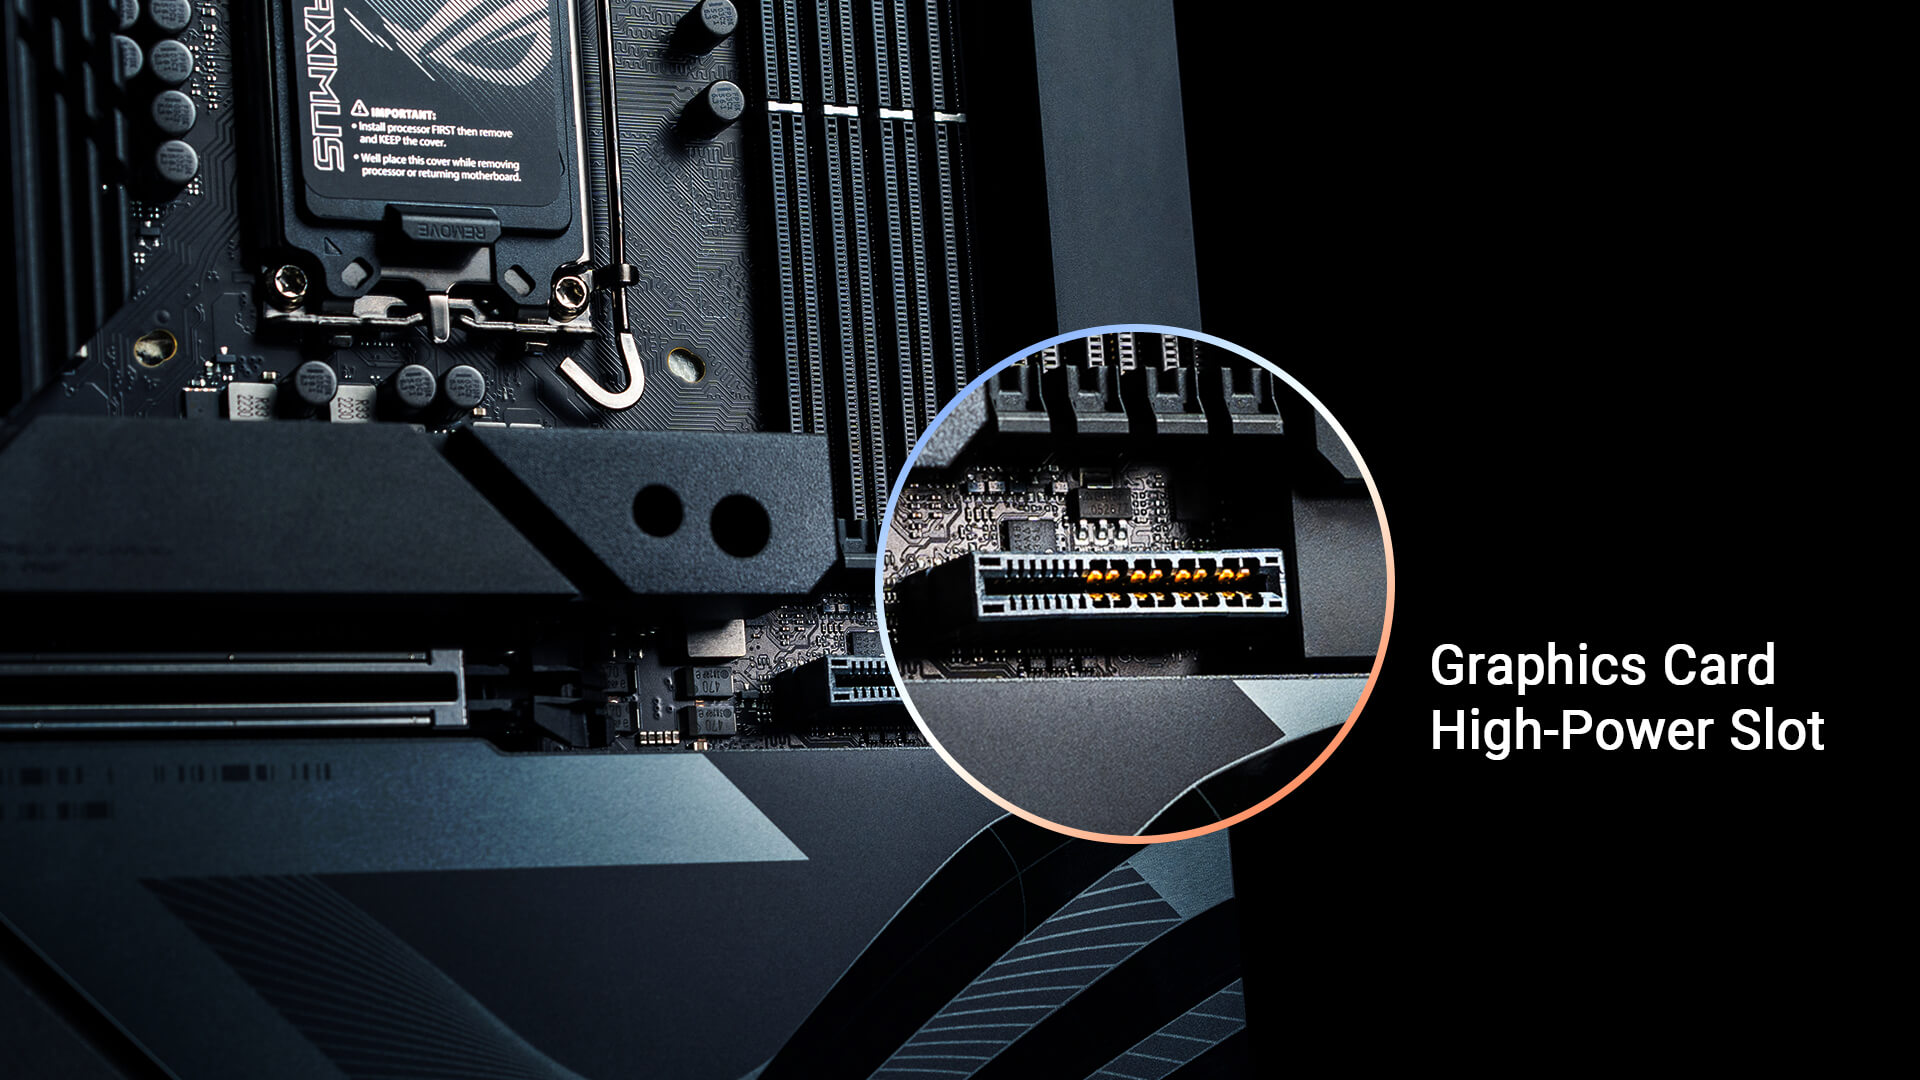 A close shot of the Graphics card high-power slot in the ROG MAXIMUS Z790 HERO BTF motherboard.